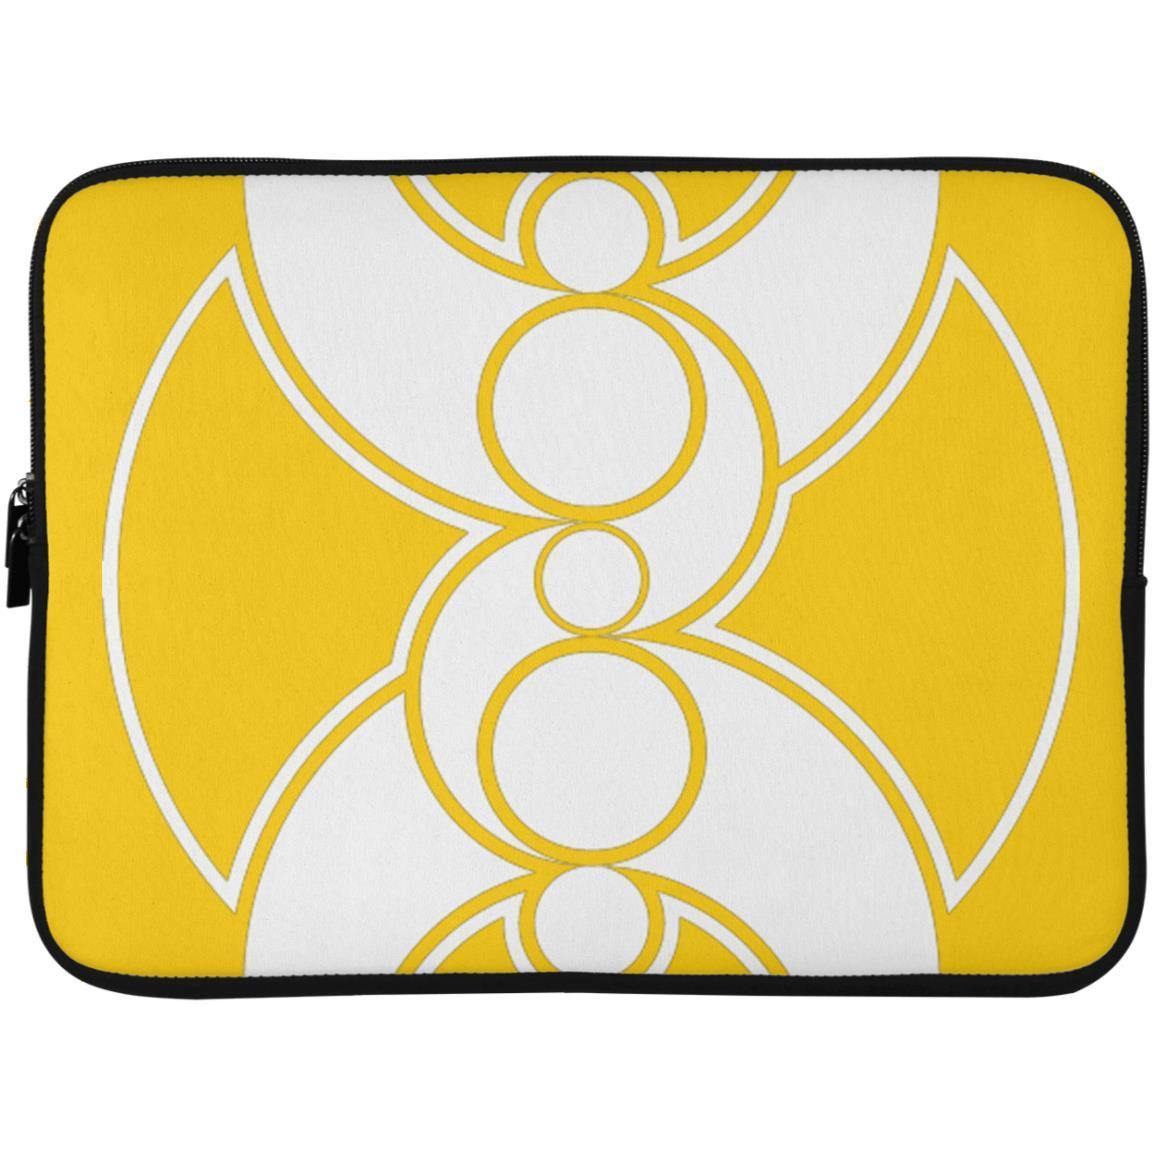 Crop Circle Laptop Sleeve - Windmill Hill 2 - Shapes of Wisdom